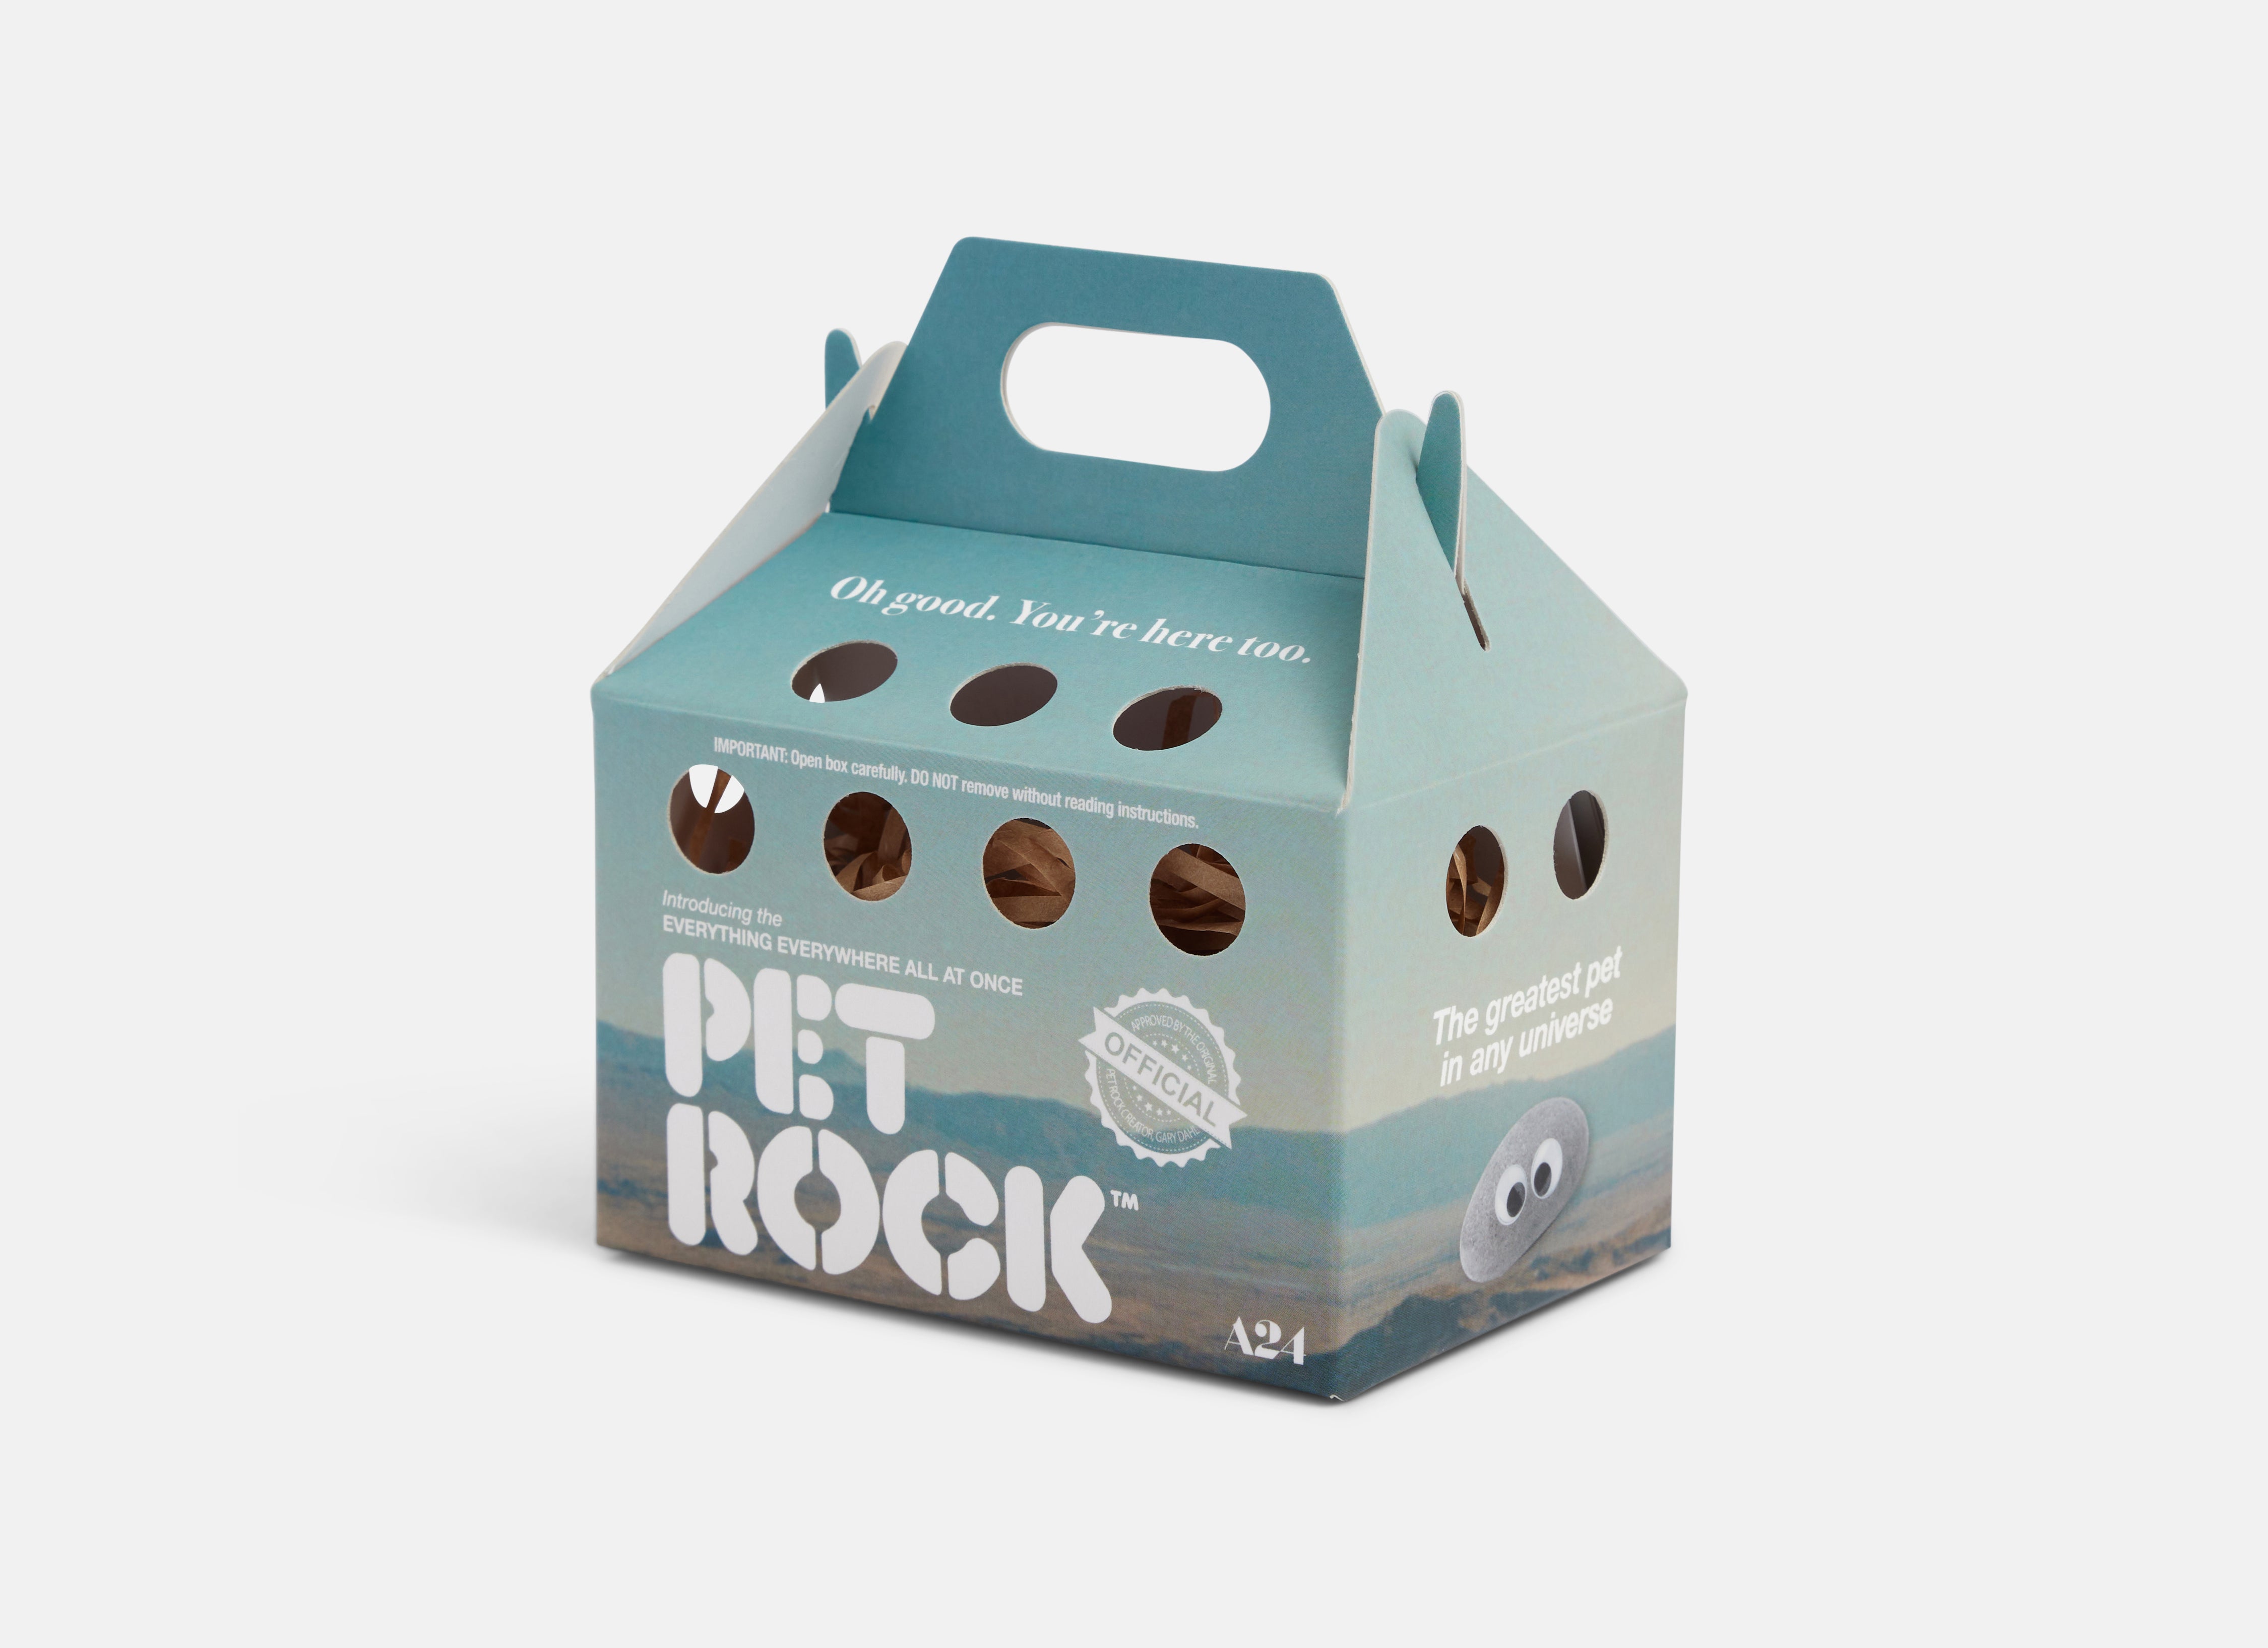 Everything Everywhere Pet Rock™ – A24 Shop